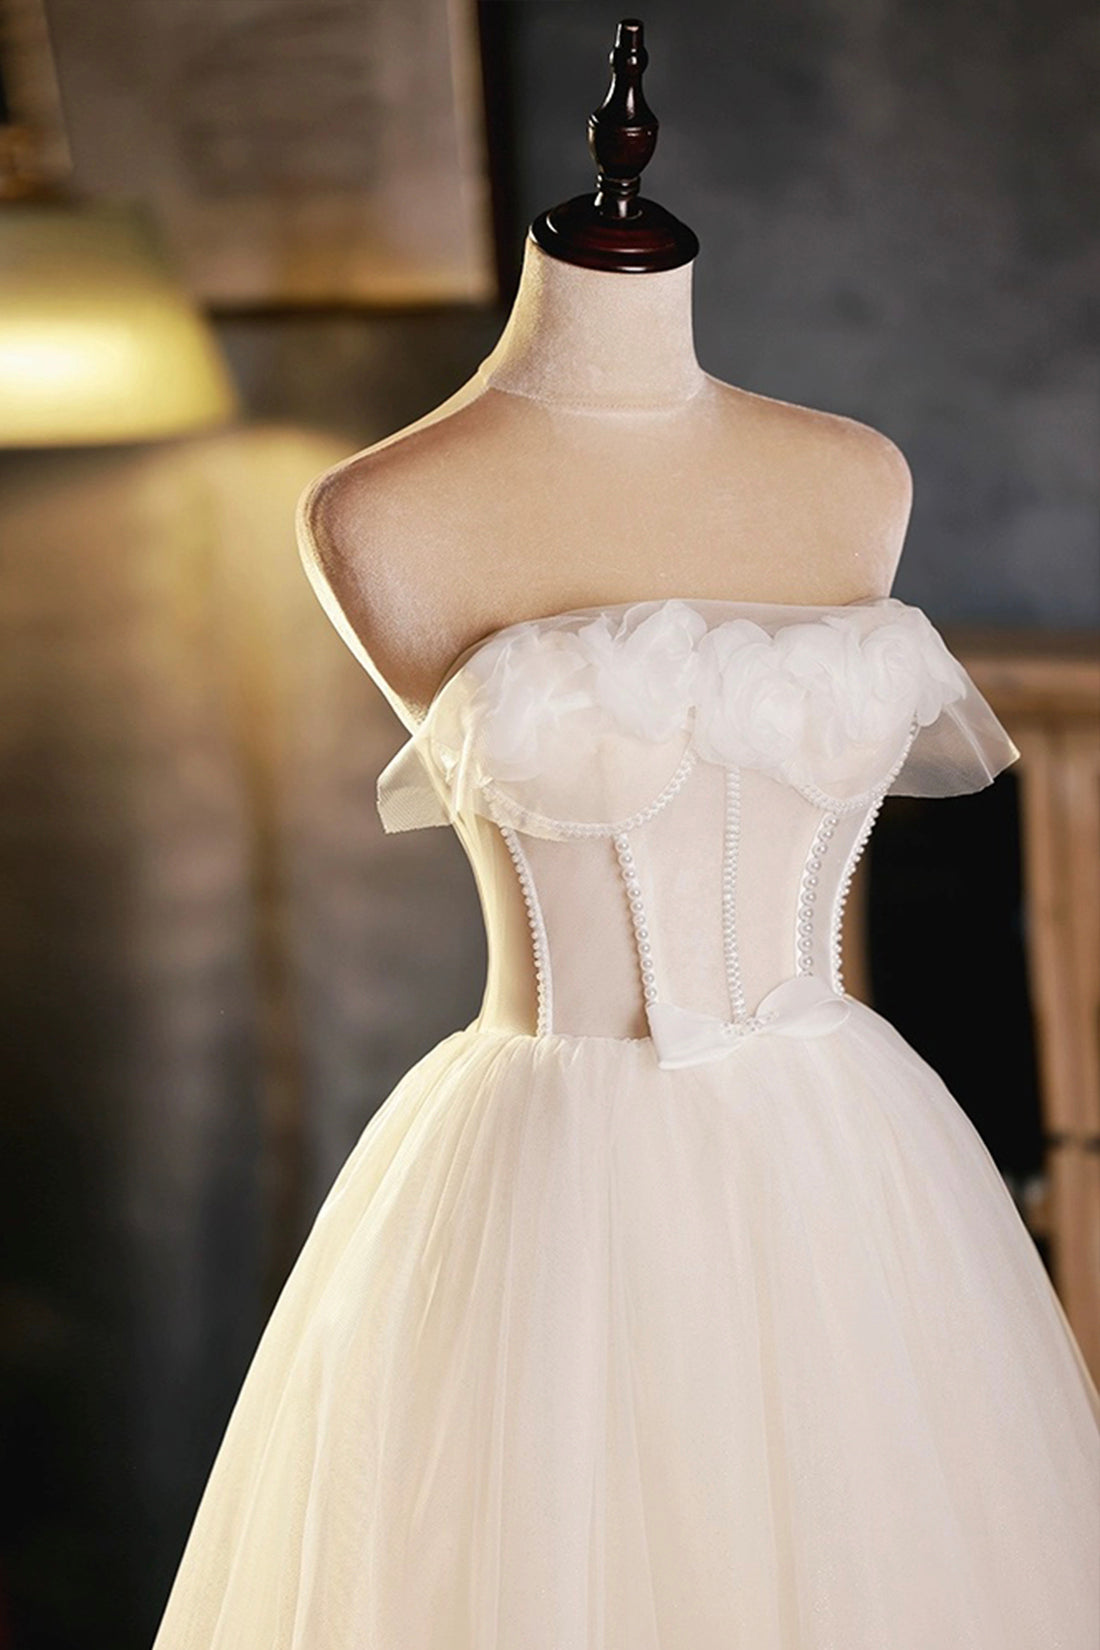 Light Champagne Strapless Tulle Short Prom Dress with 3D Flowers, Cute A-Line Party Dress